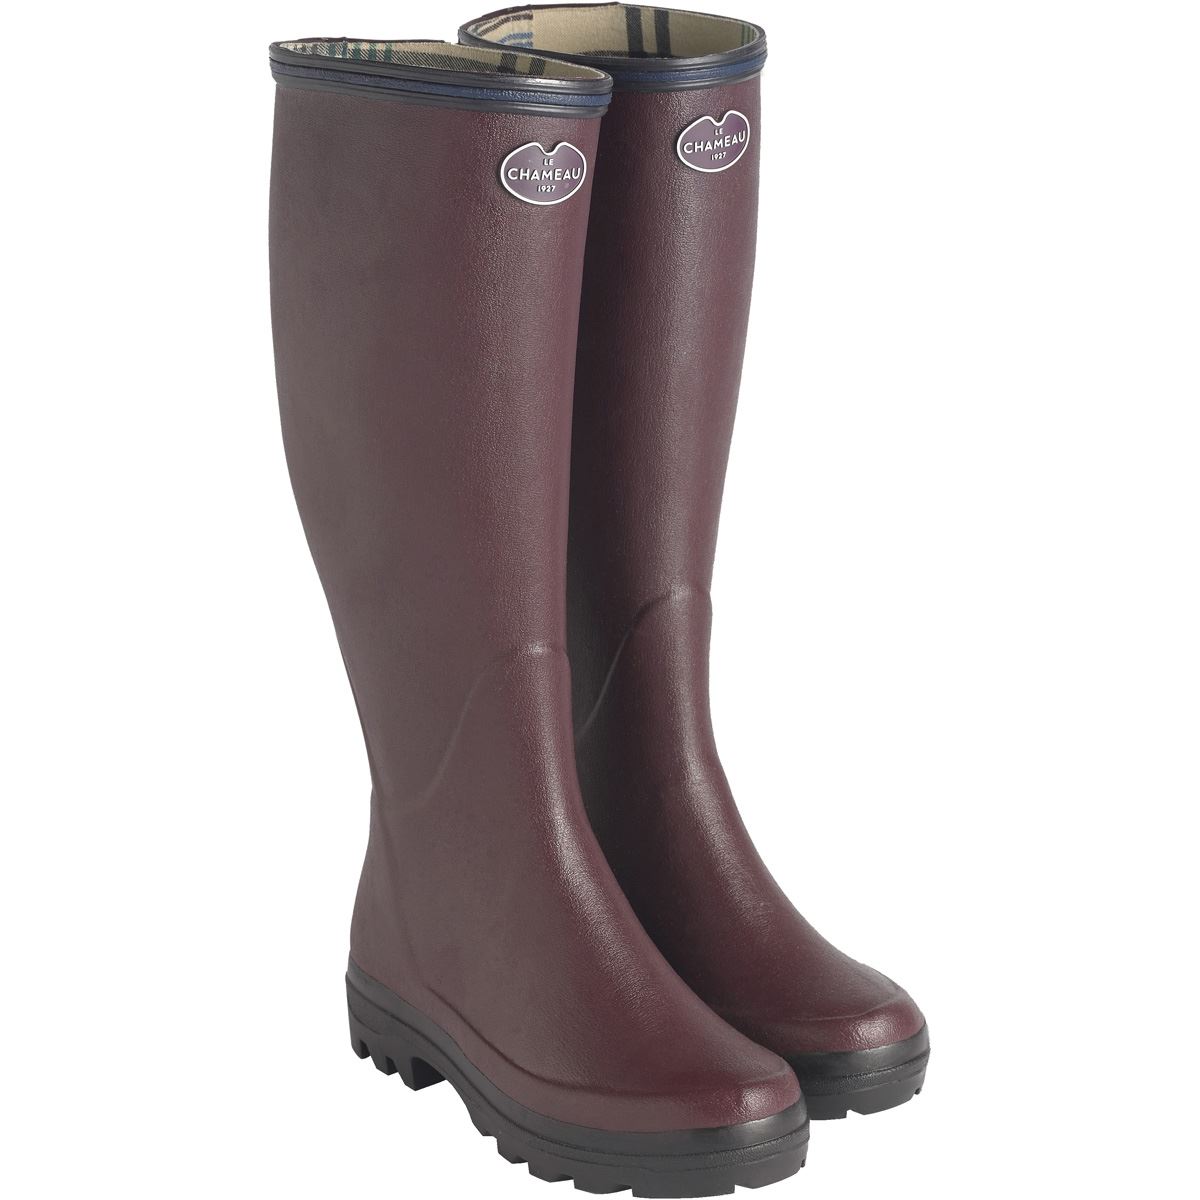 What's the weight of a size 8 Le Chameau Giverny Women's Wellington boot?